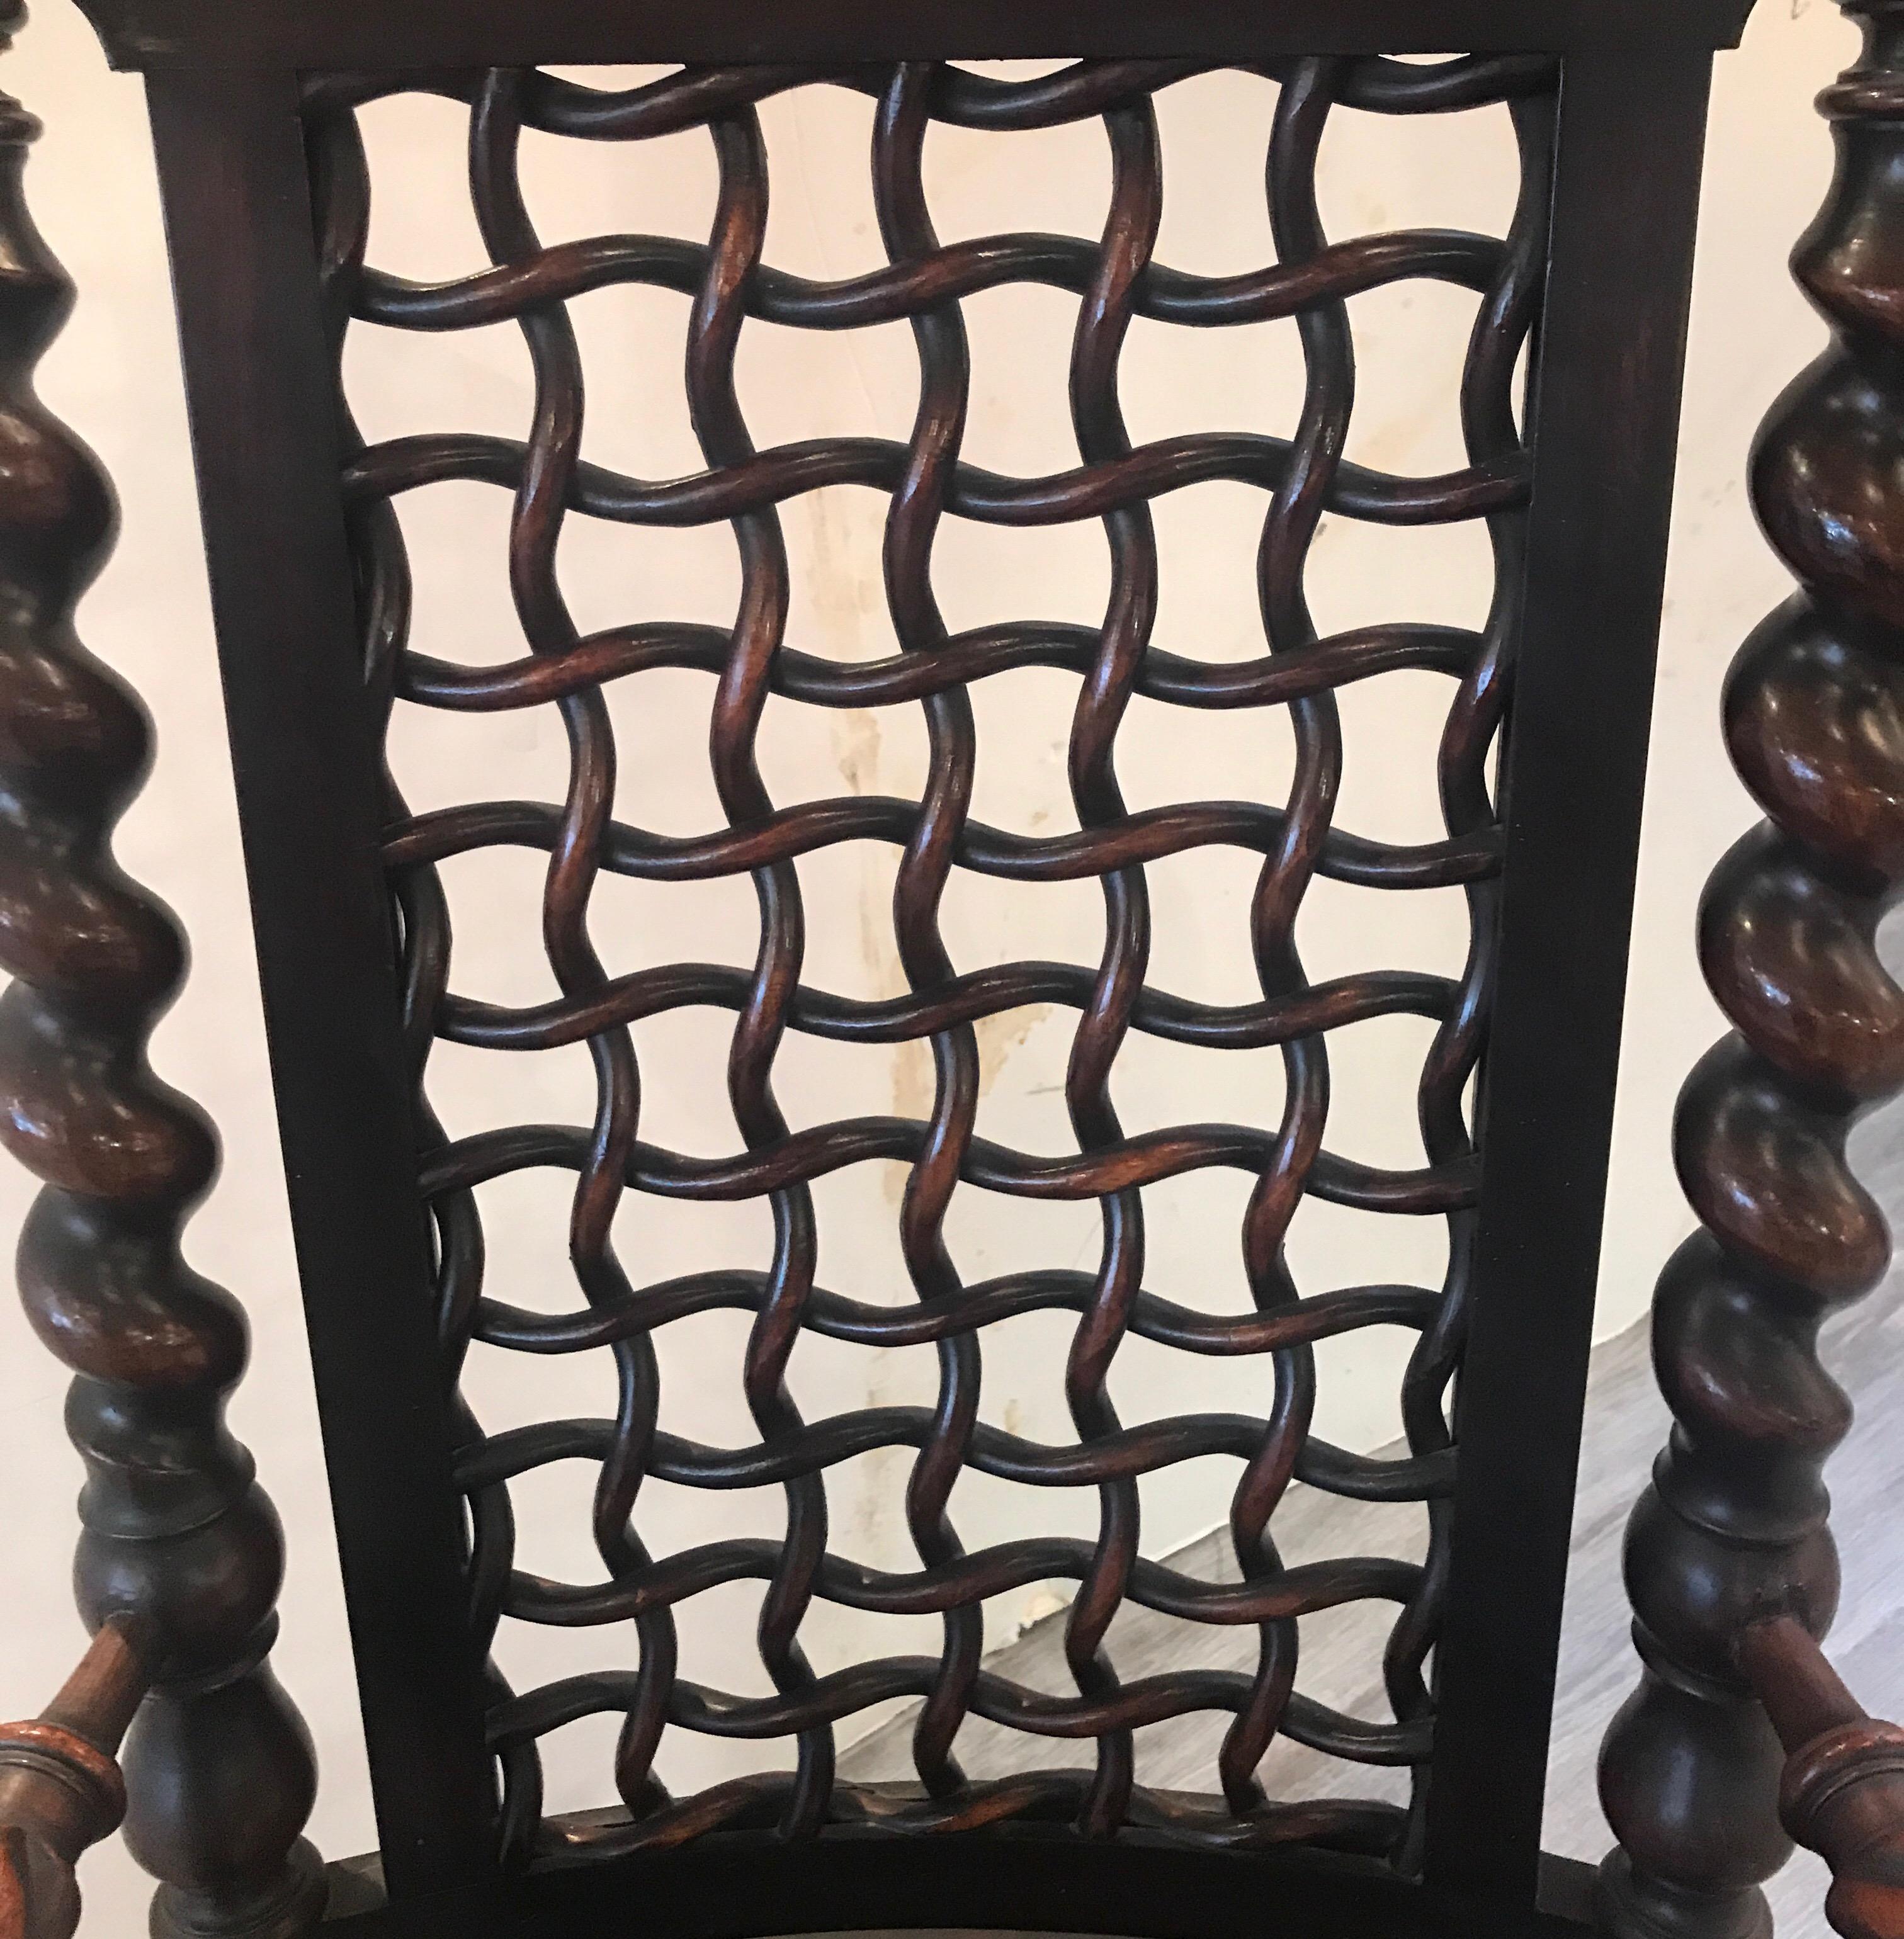 This fabulous rocker was made by the Merklen Brothers in NYC between 1885 and 1895.  The interlocking spiral lattice is called Moorish Fretwork and was patented by Moses Y. Ransom in 1885.
 The back with a woven solid wood dowel surface flanked by